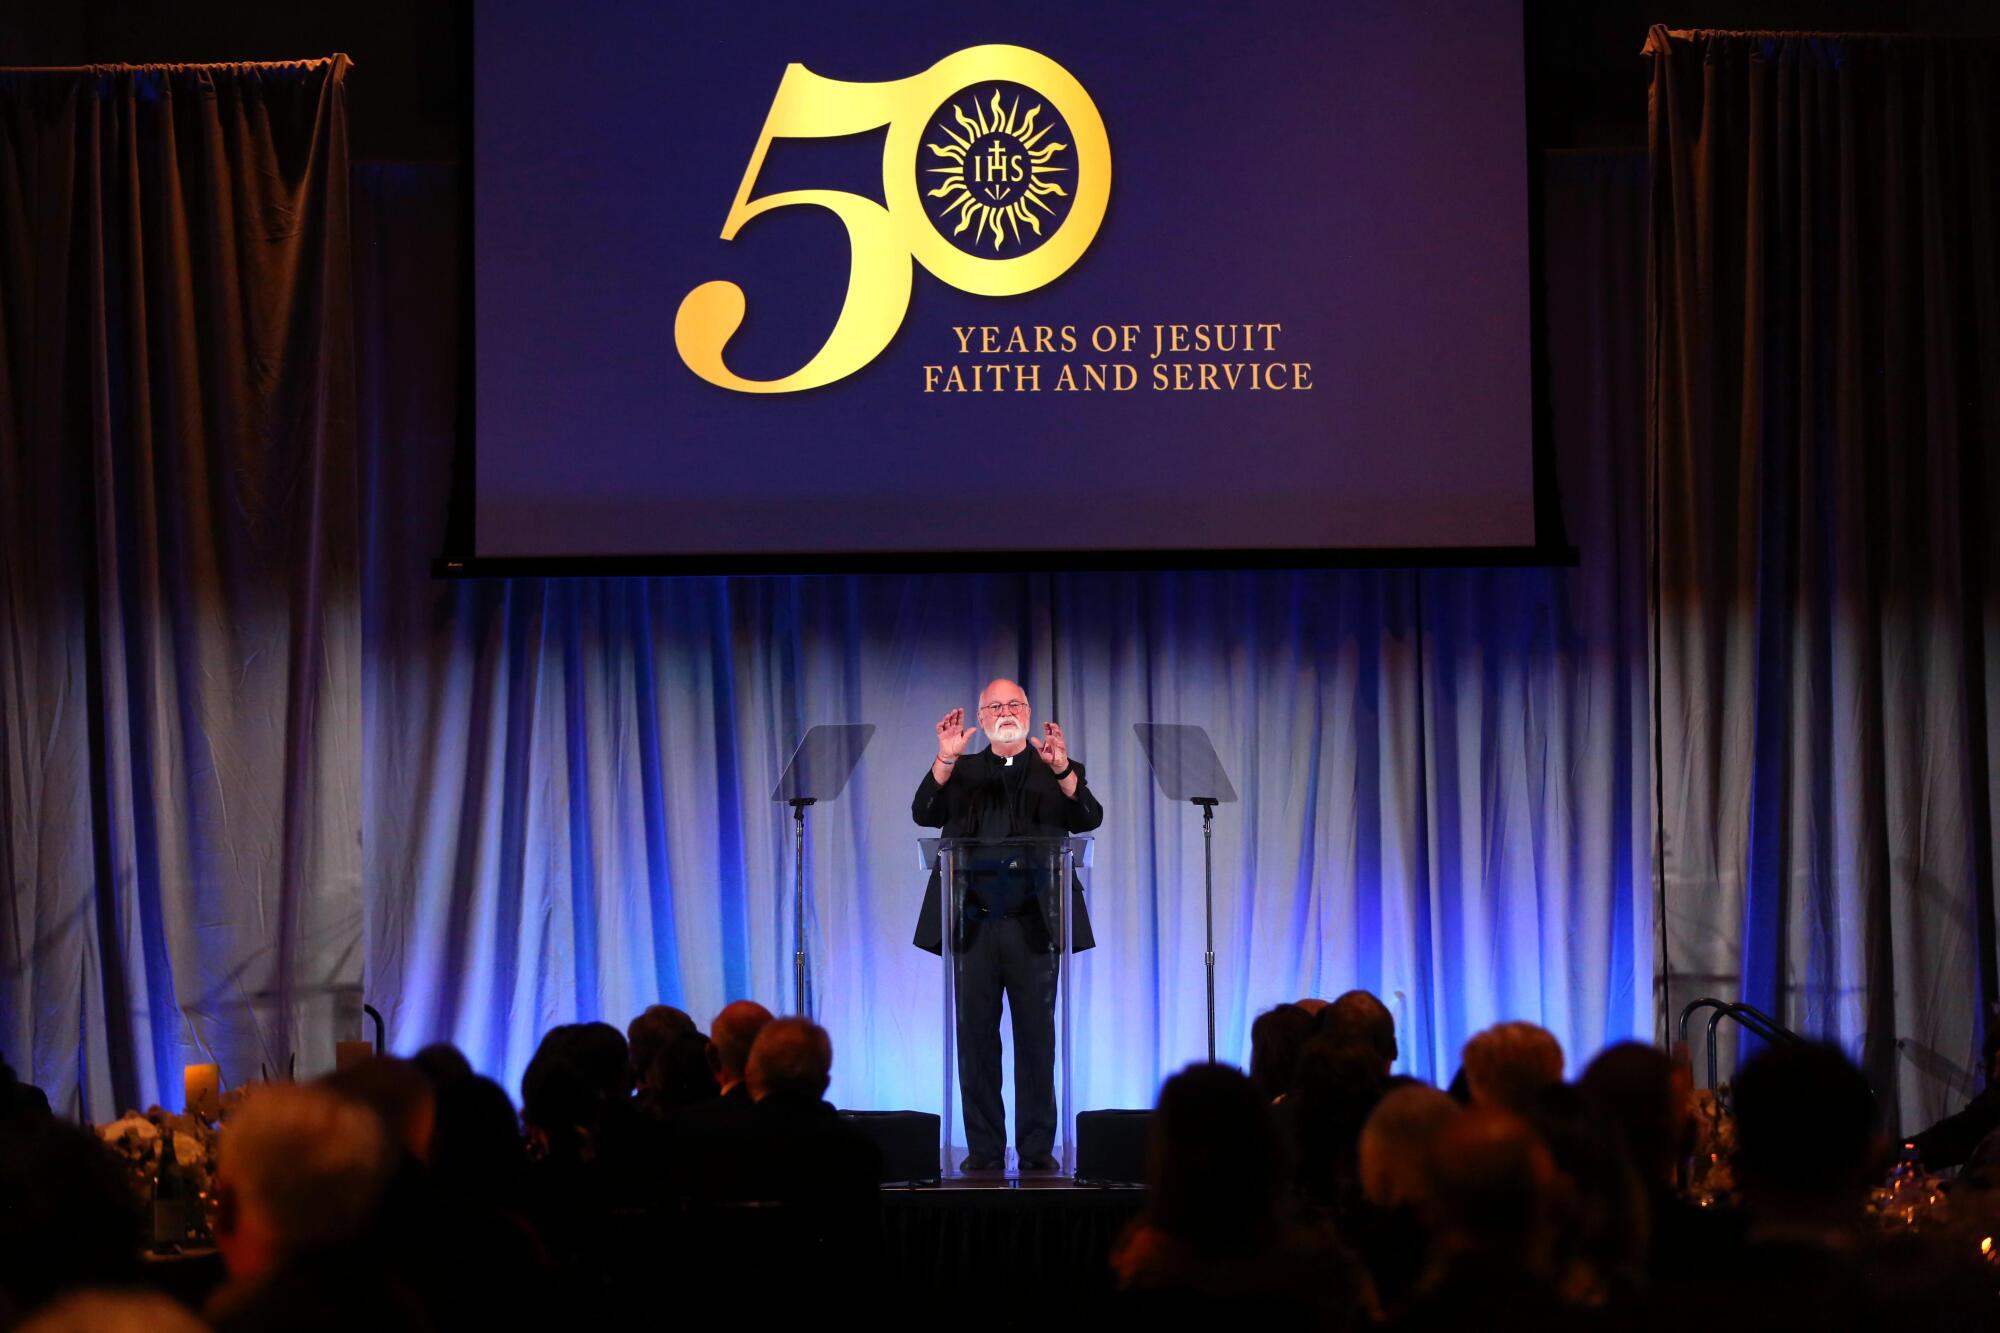 Father Greg Boyle thanks supporters at his 50th Jubilee event at Loyola High School.